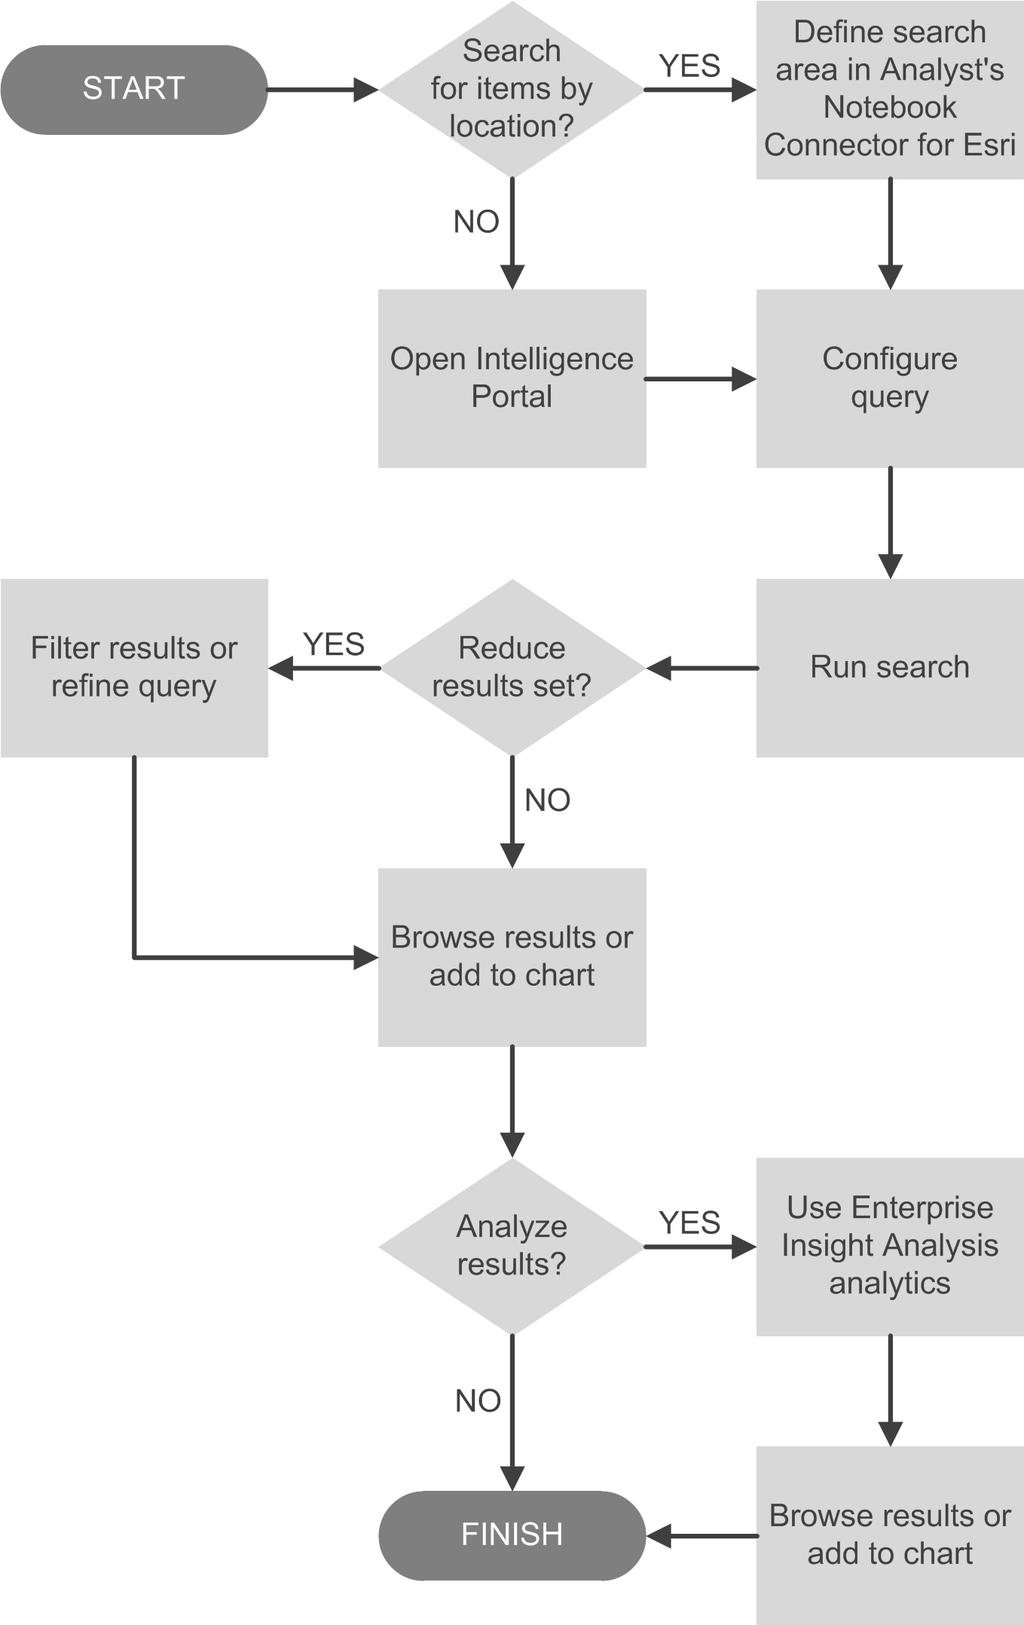 Figure 1. A typical Enterprise Insight Analysis workflow.